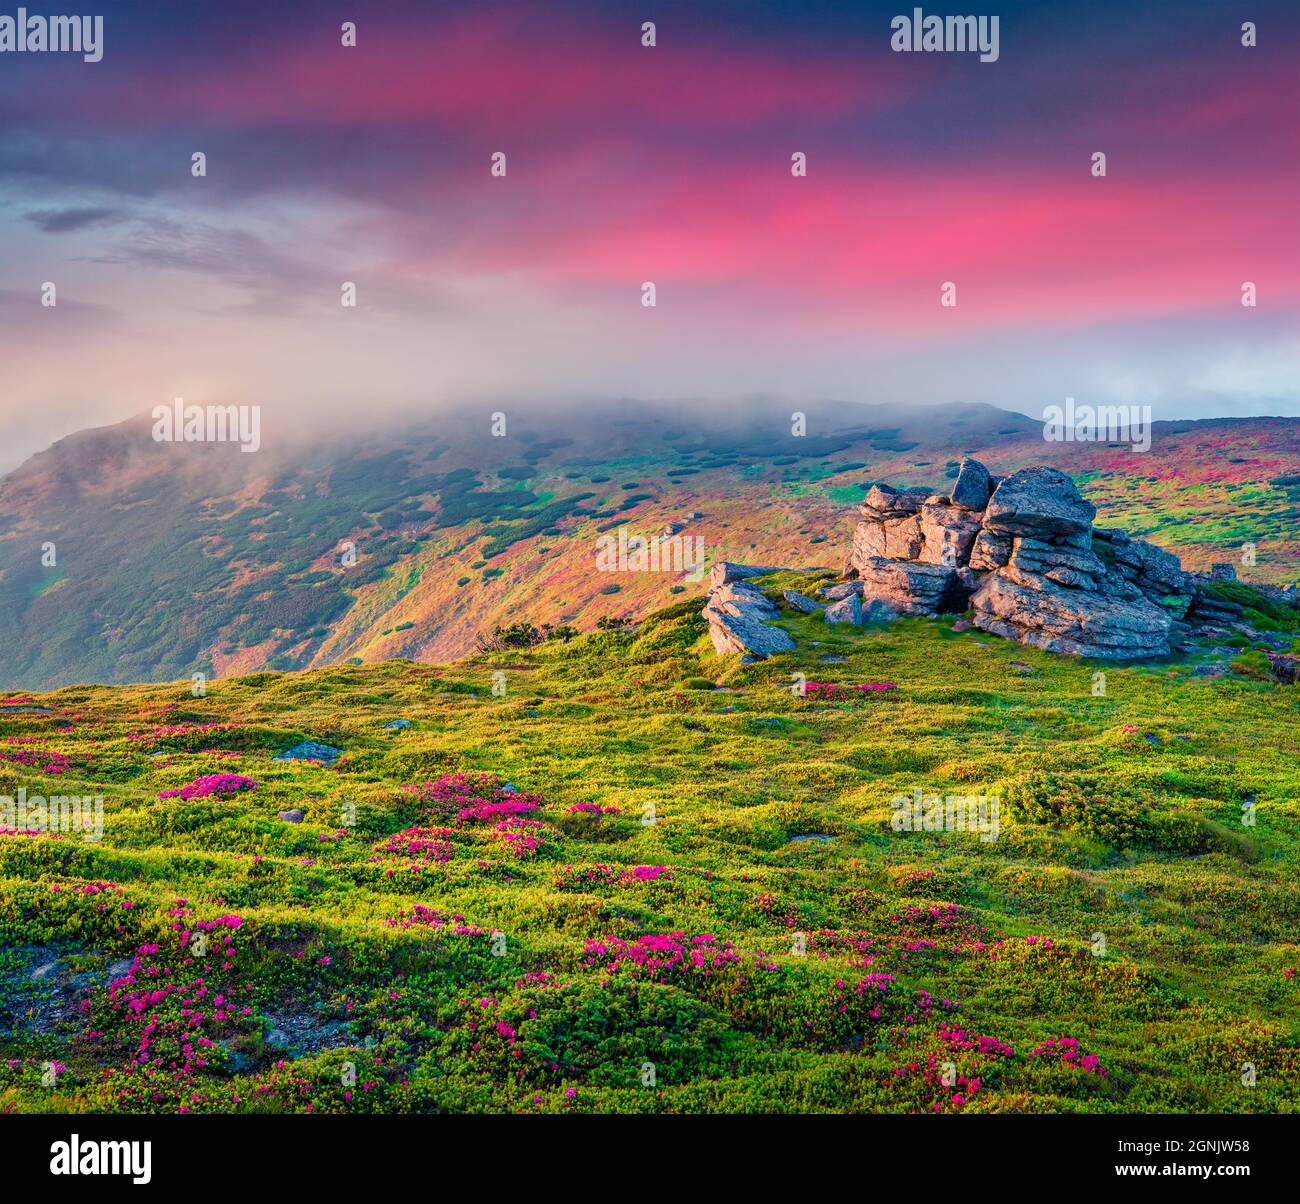 Landscape photography. Misty summer sunrise with fields of blooming rhododendron flowers. Splendid outdoors scene in the Carpathian mountains, Ukraine Stock Photo